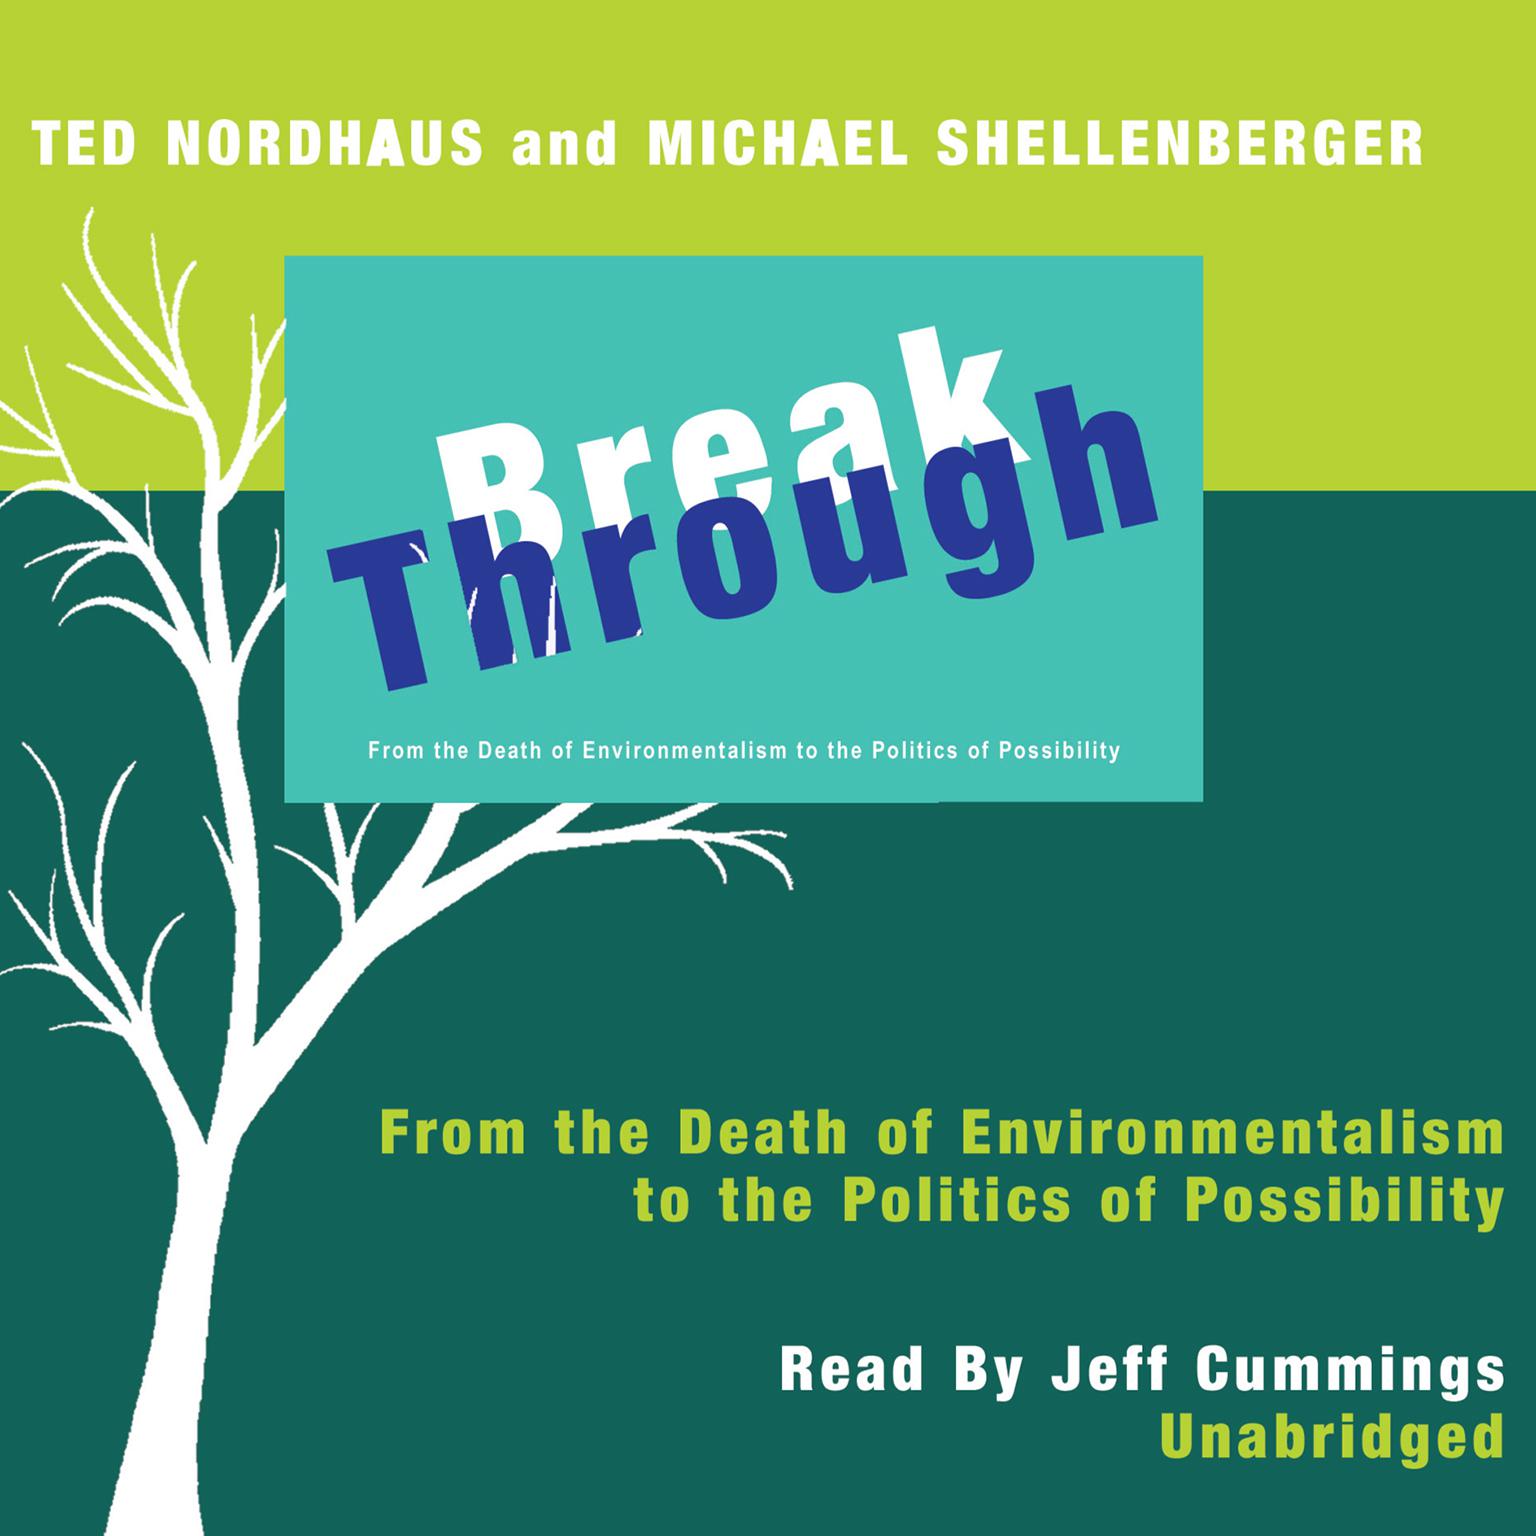 Break Through: From the Death of Environmentalism to the Politics of Possibility Audiobook, by Ted Nordhaus